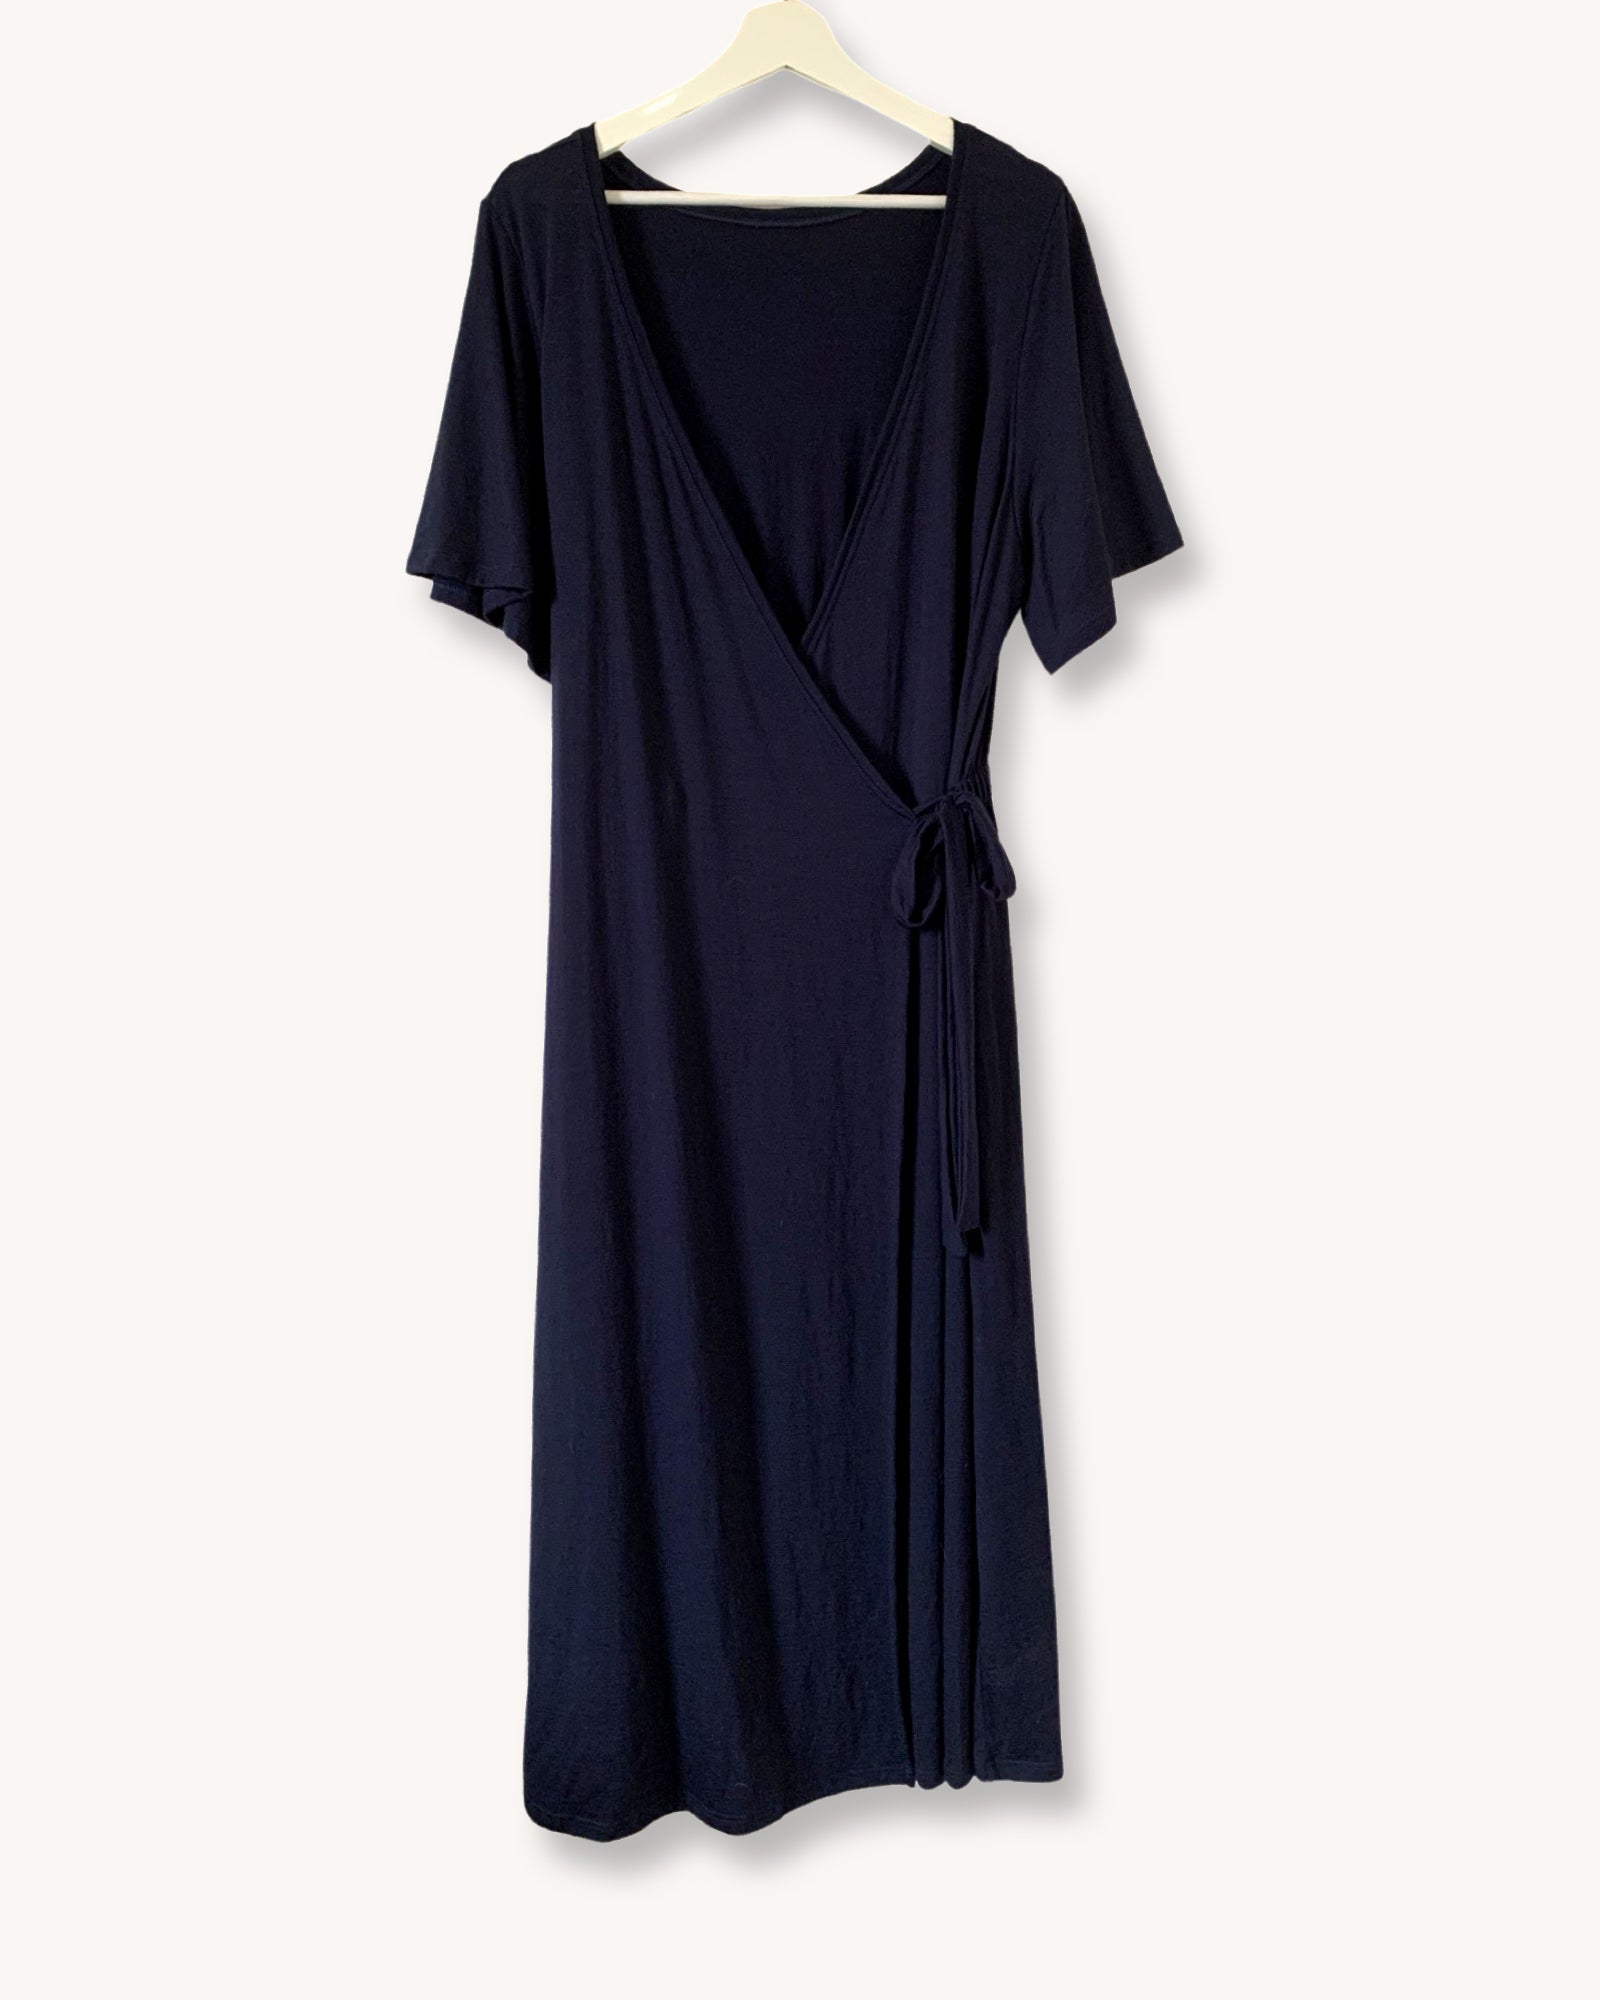 Wrap Dress Front Butterfly Sleeves French Navy Fine Merino Wool